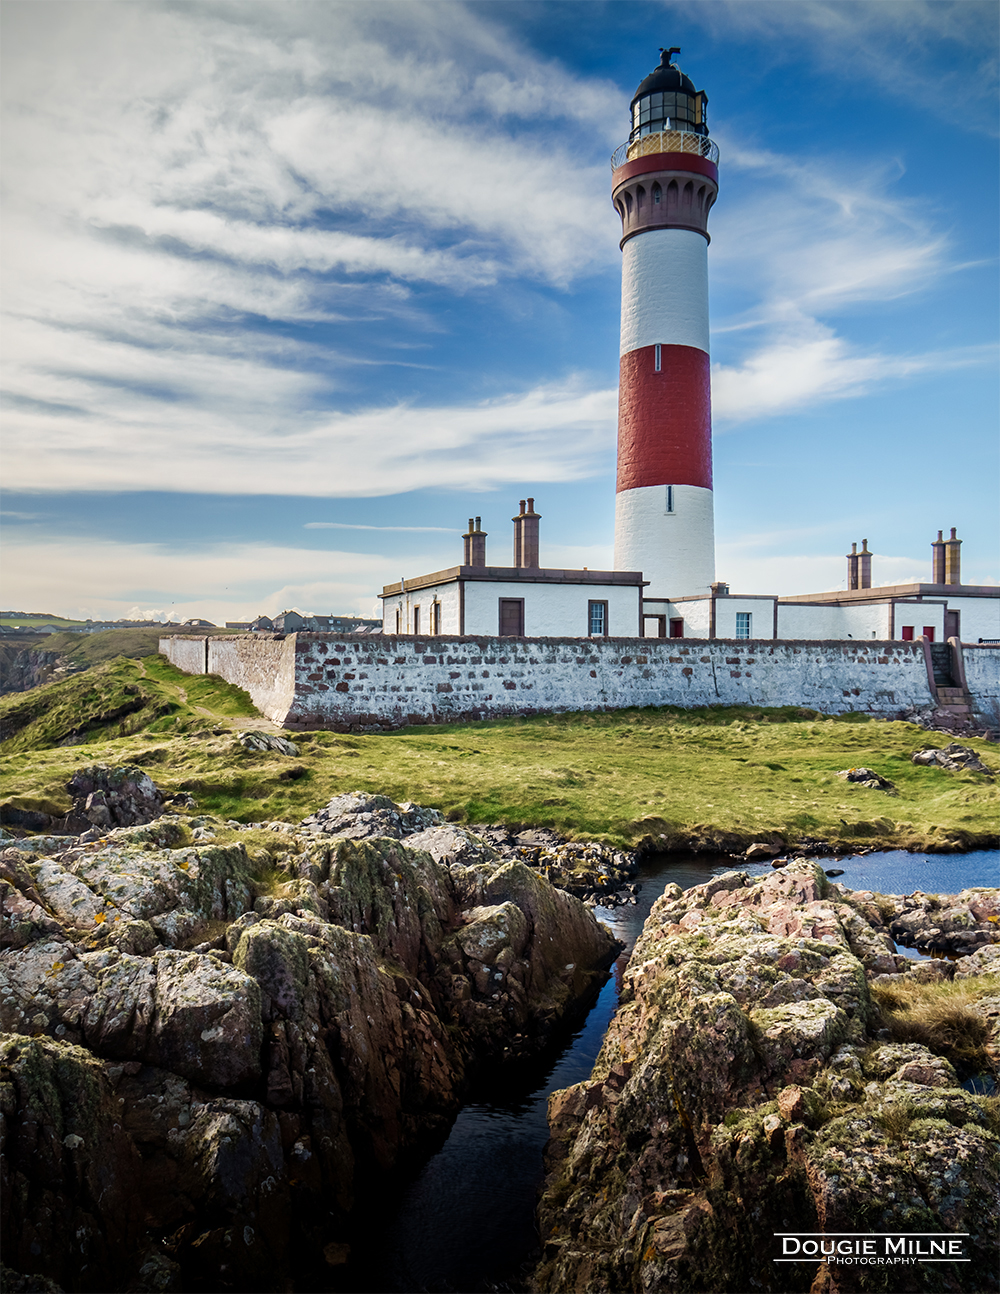 Buchan Ness Lighthouse in the Sunshine  - Copyright Dougie Milne Photography 2023